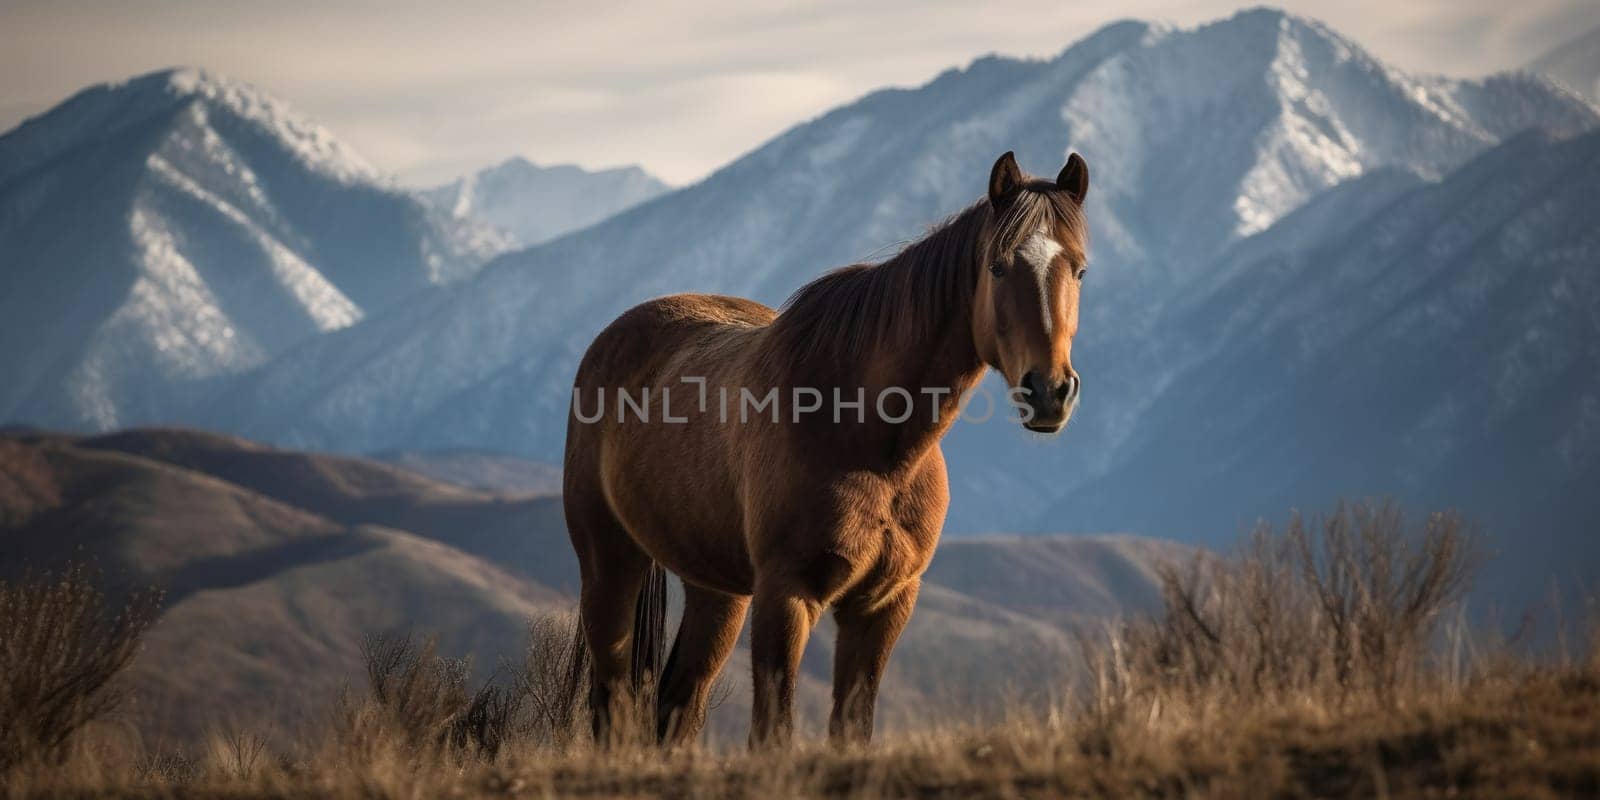 Beautiful Domestic Horse In A Valley Against Amazing Mountain Landscape View by GekaSkr